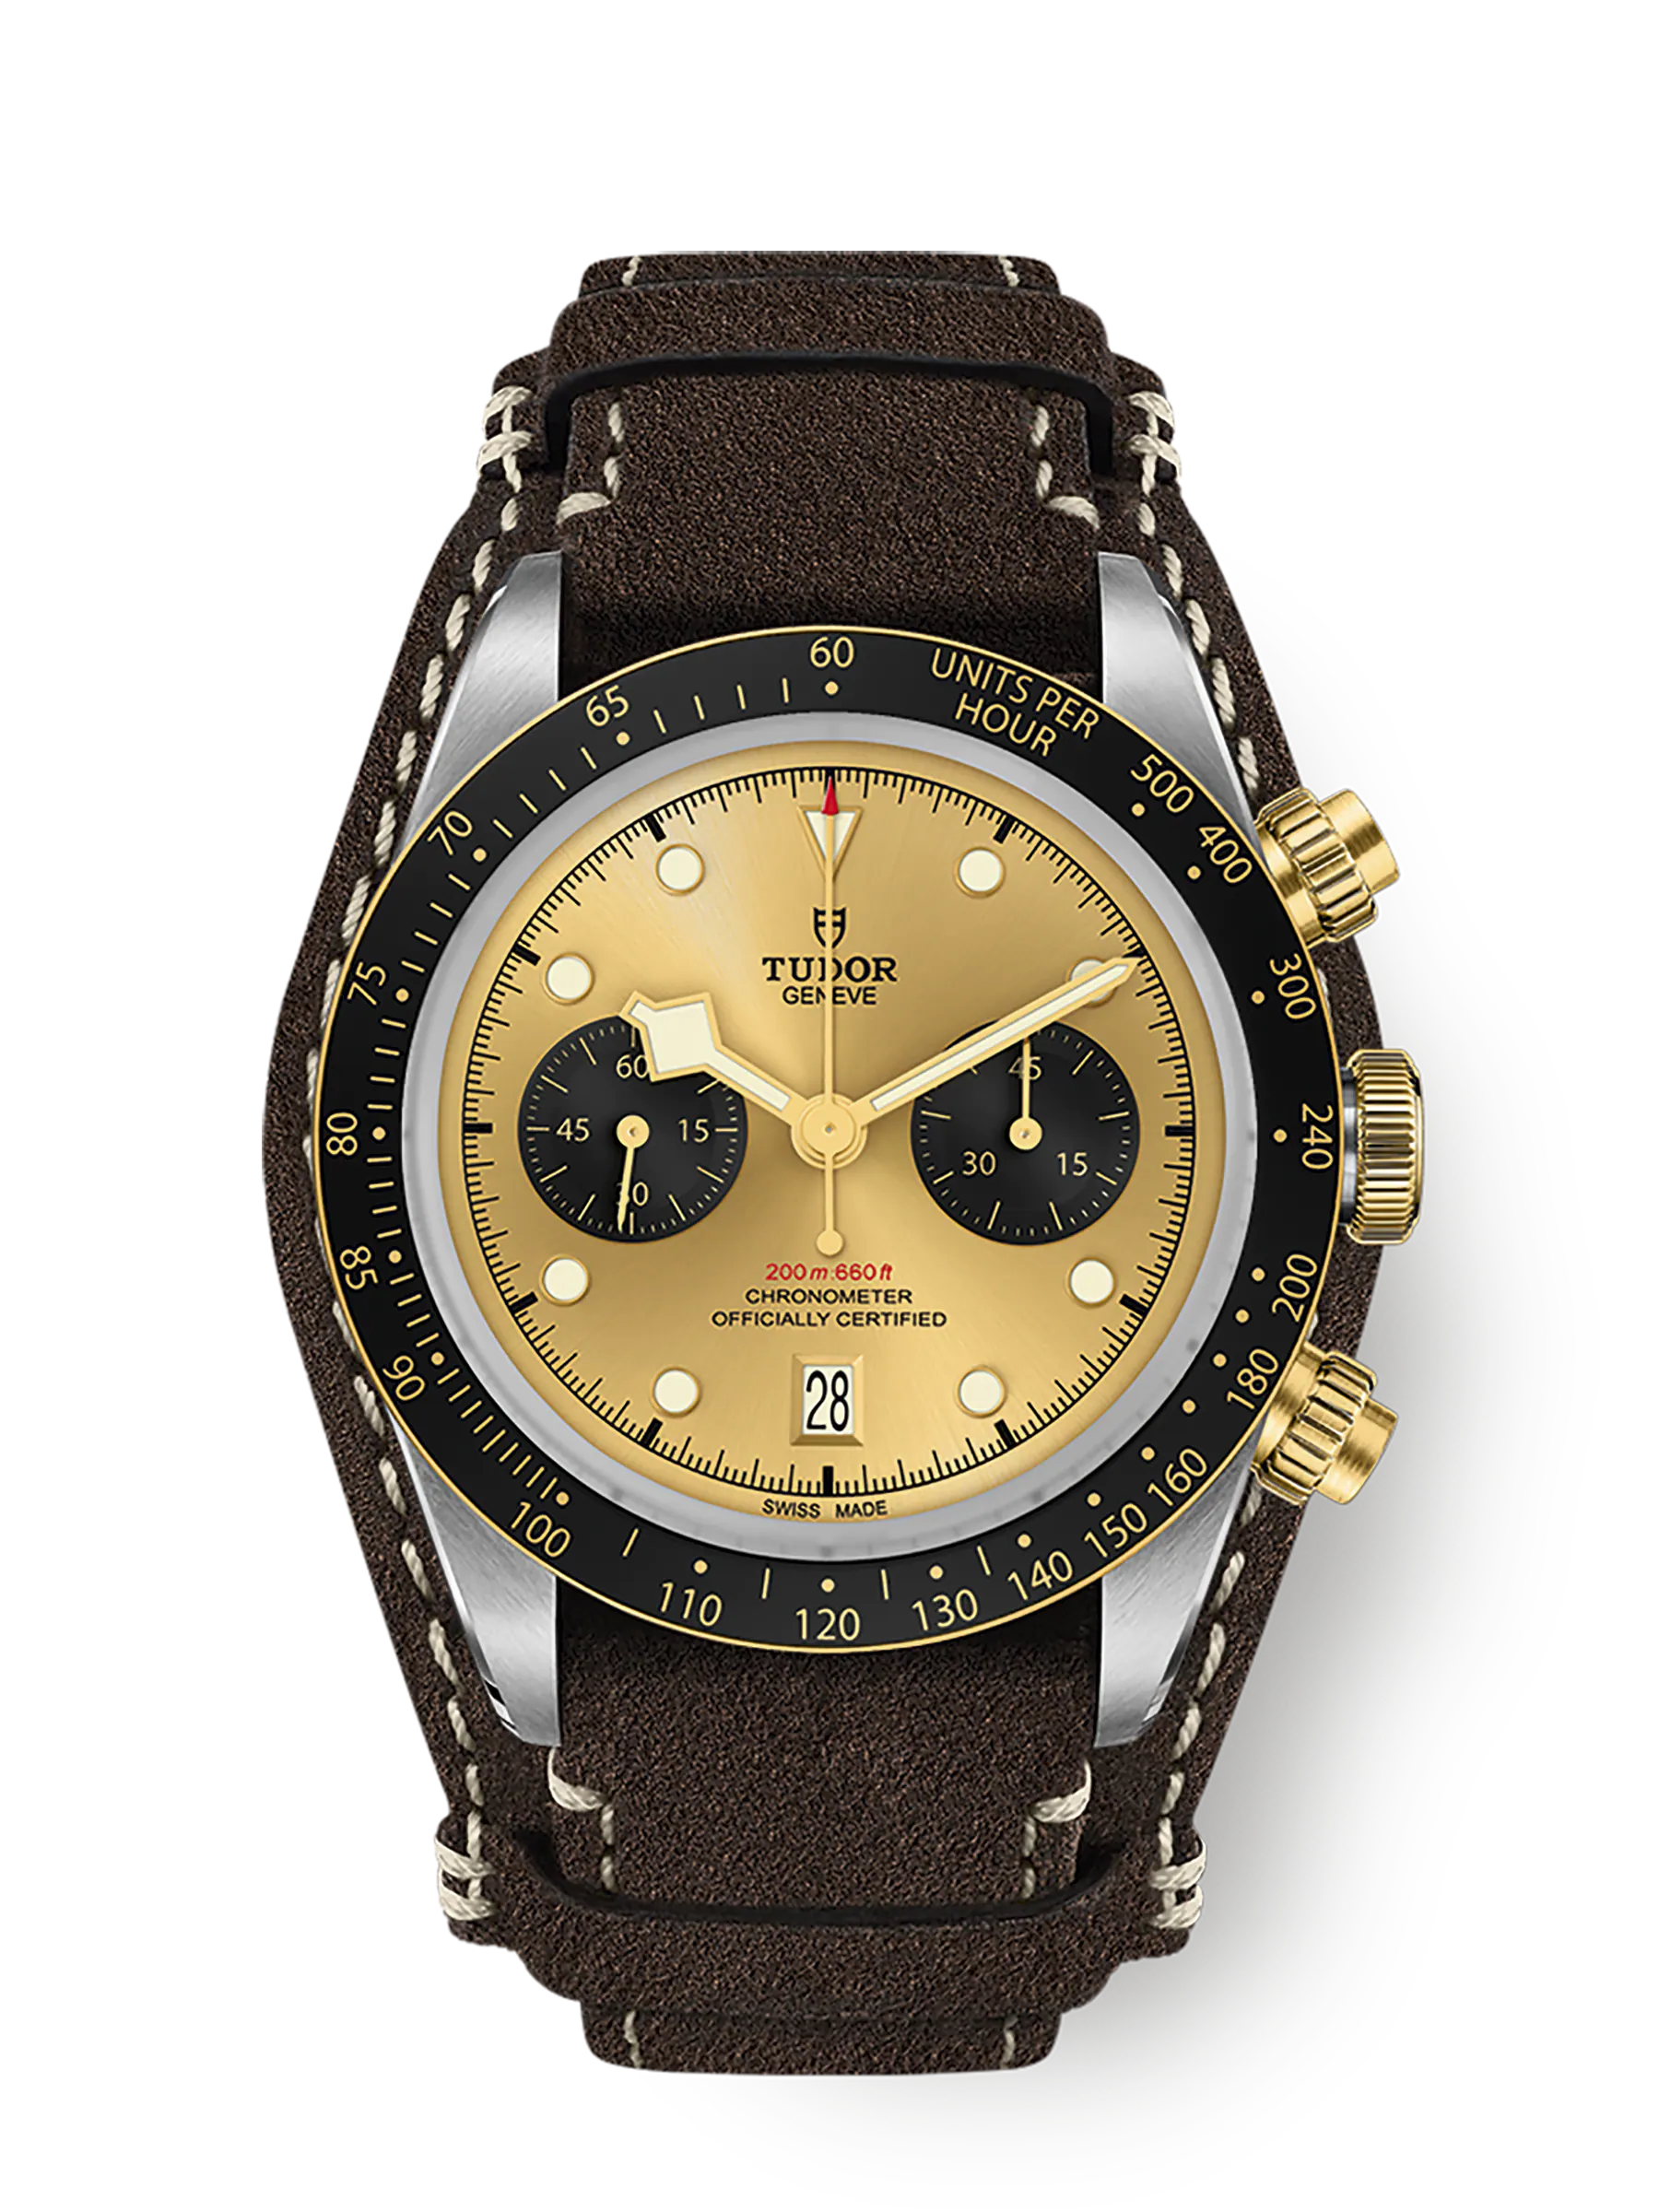 Tudor Black Bay Chrono S&G, 41mm, Stainless Steel and 18k Yellow Gold, Ref# M79363N-0008